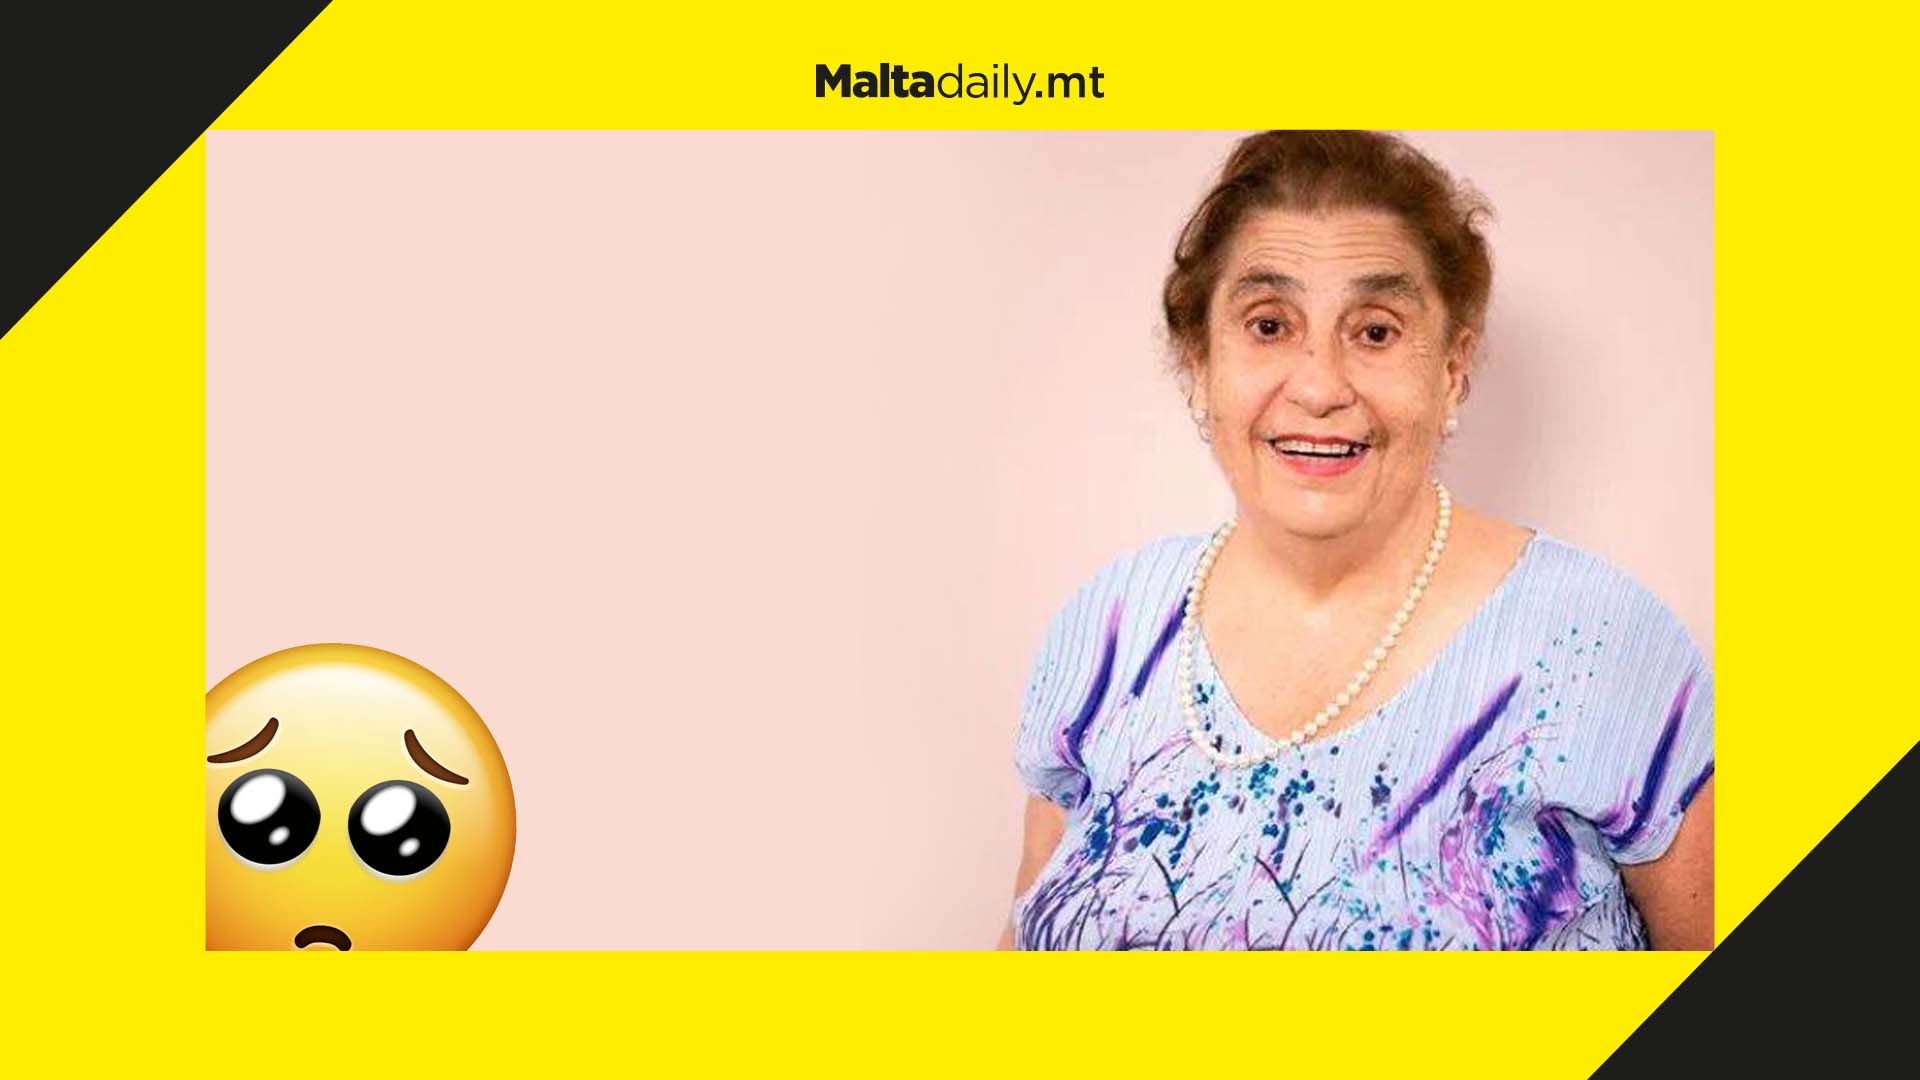 Remembering Malta's Nanna: Mary Rose Bonello passed away 7 years ago today